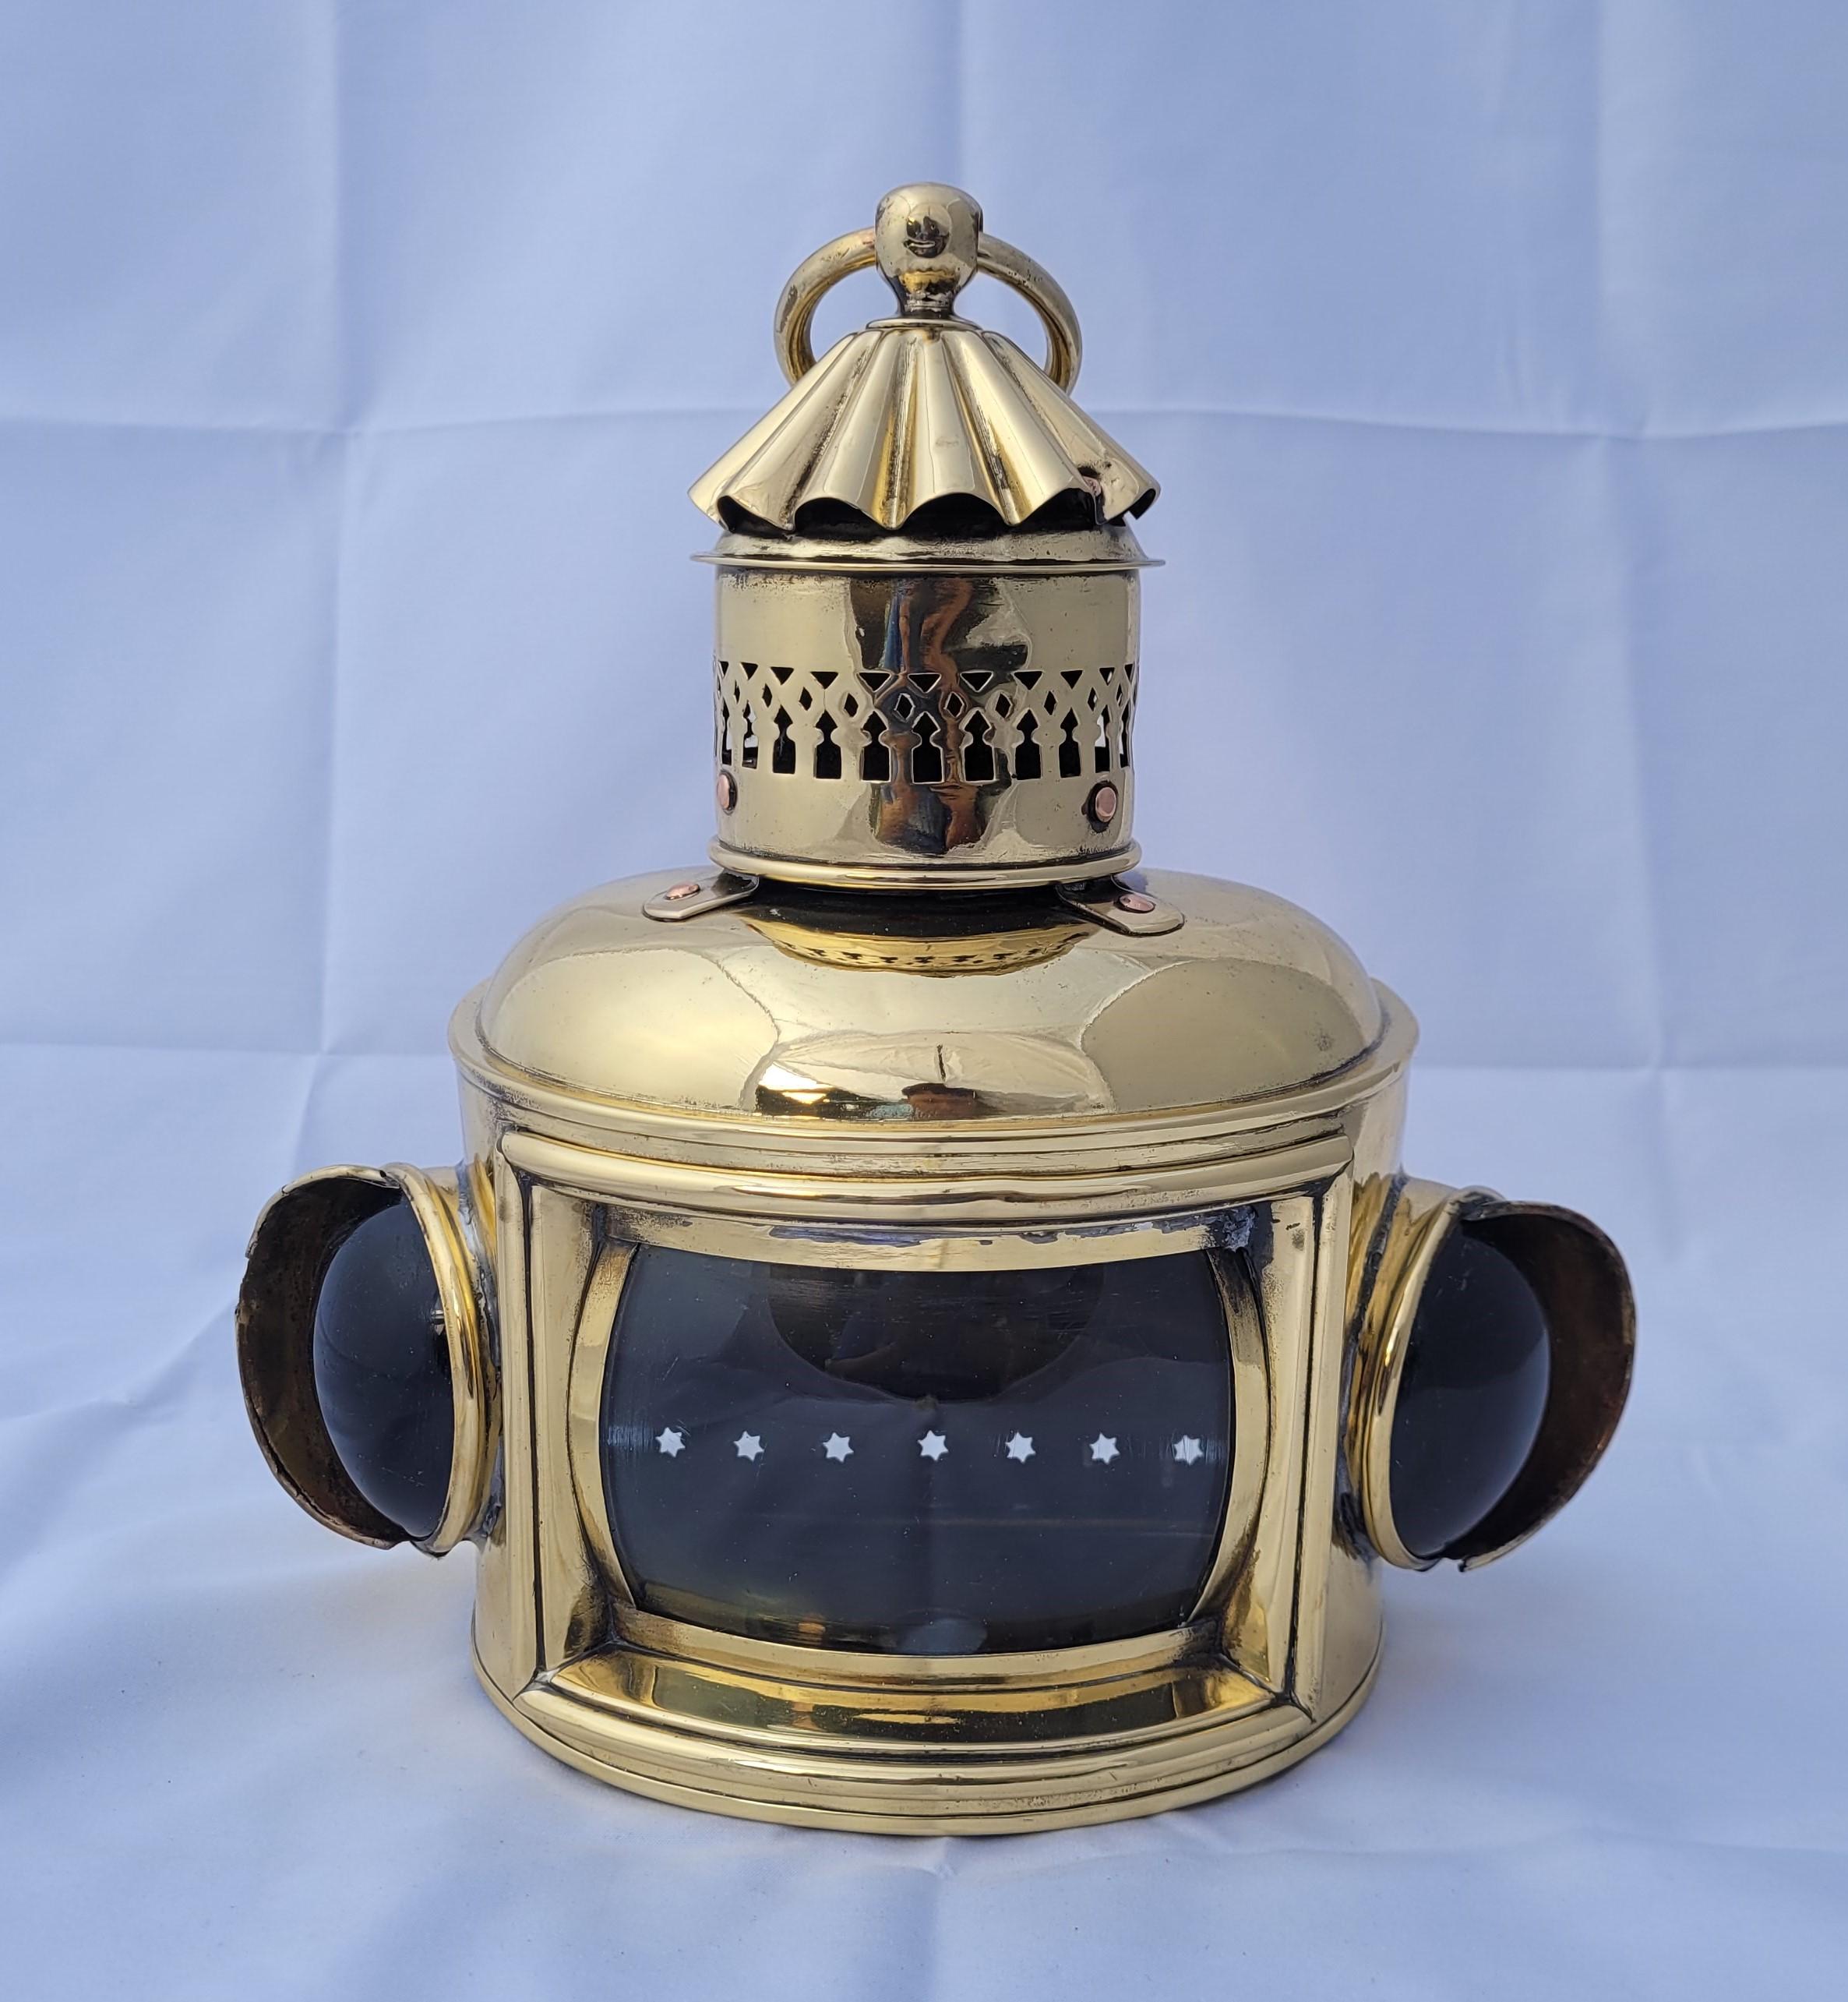 Choice antique nautical boat lantern with clear convex main lens and red and green bullseye lenses. With oil tank, burner and wick inside. Vented top with carry loop. Hinged rear door. Meticulously polished and lacquered. Fabulous antique ship